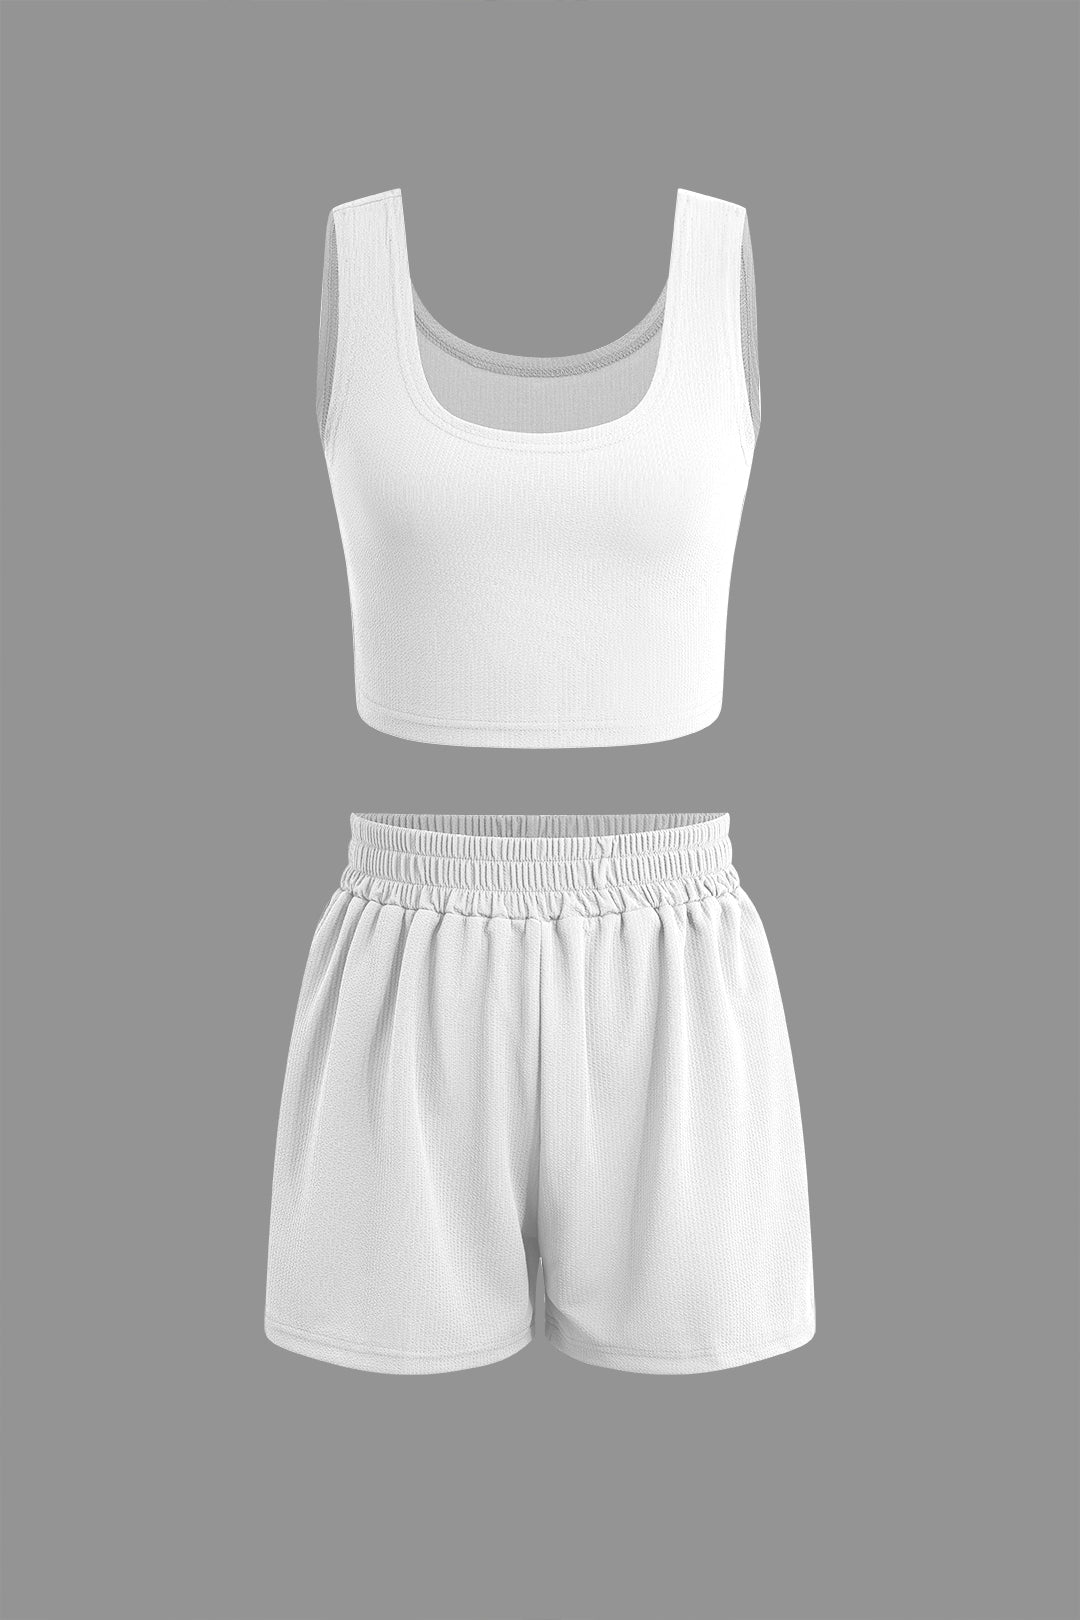 Solid Crop Tank Top And Short Sets